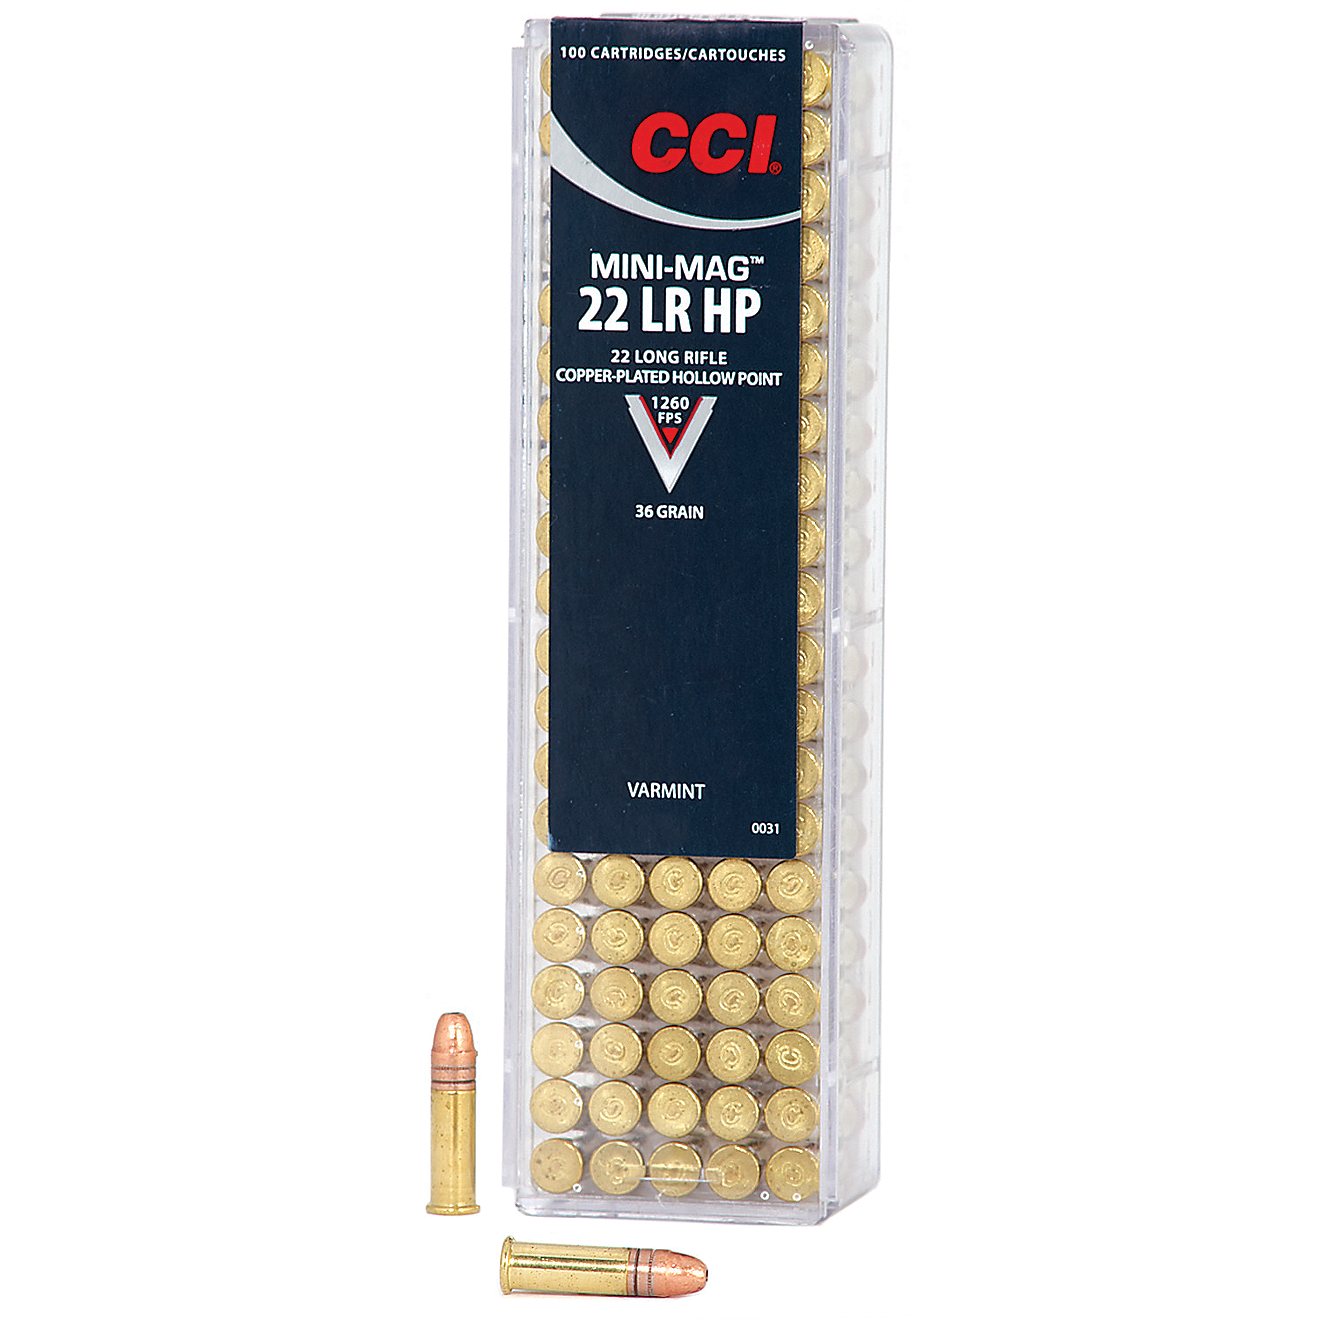 CCI® Mini-Mag® .22 LR Copper-Plated Hollow Point Ammunition - 100 Rounds                                                       - view number 1